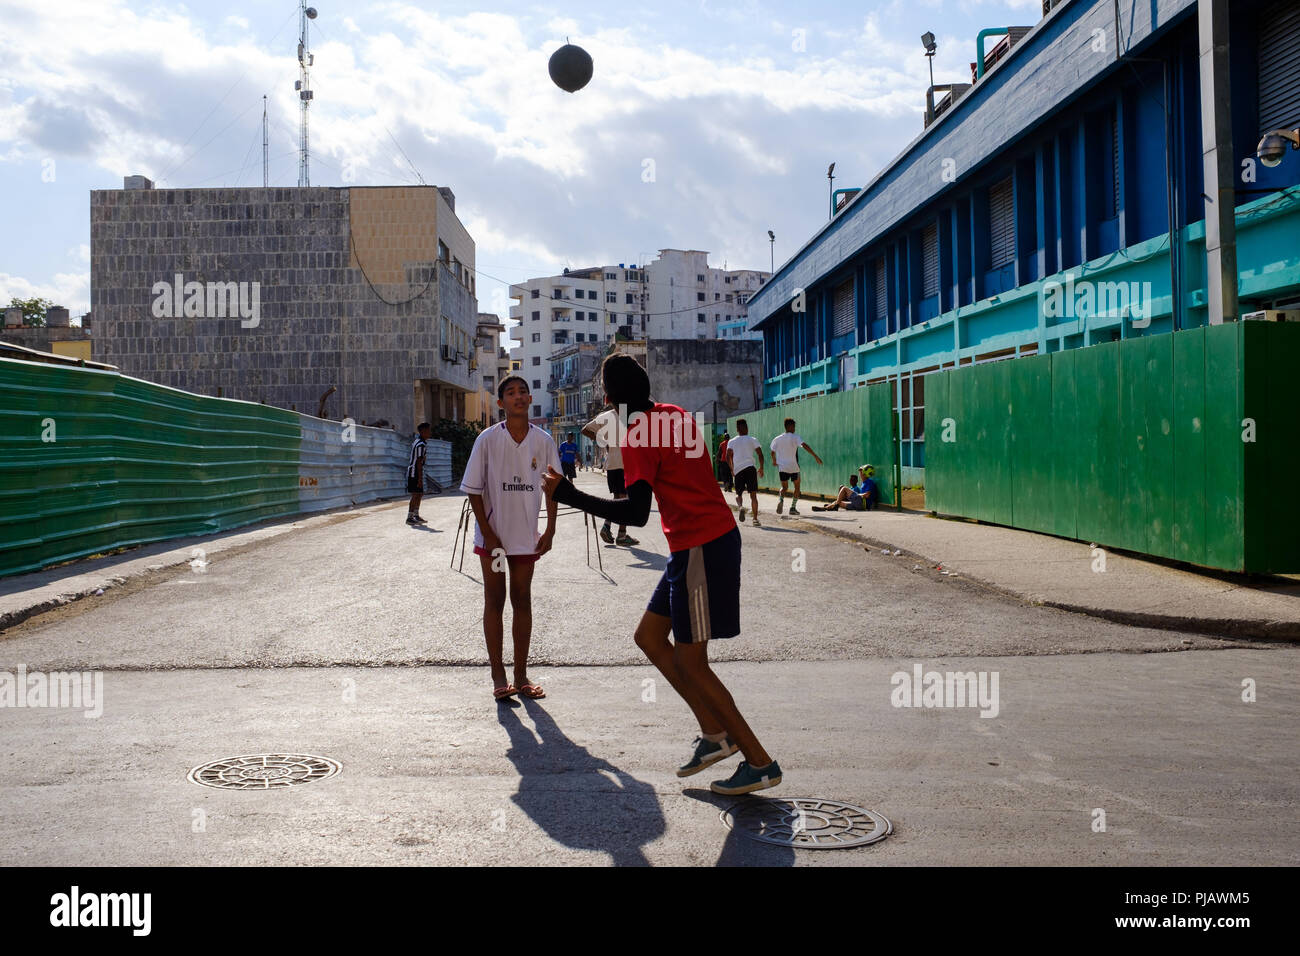 HAVANA, CUBA - CIRCA MARCH 2017:  Boys playing soccer in the streets of  Havana. This is very typical around town. Stock Photo